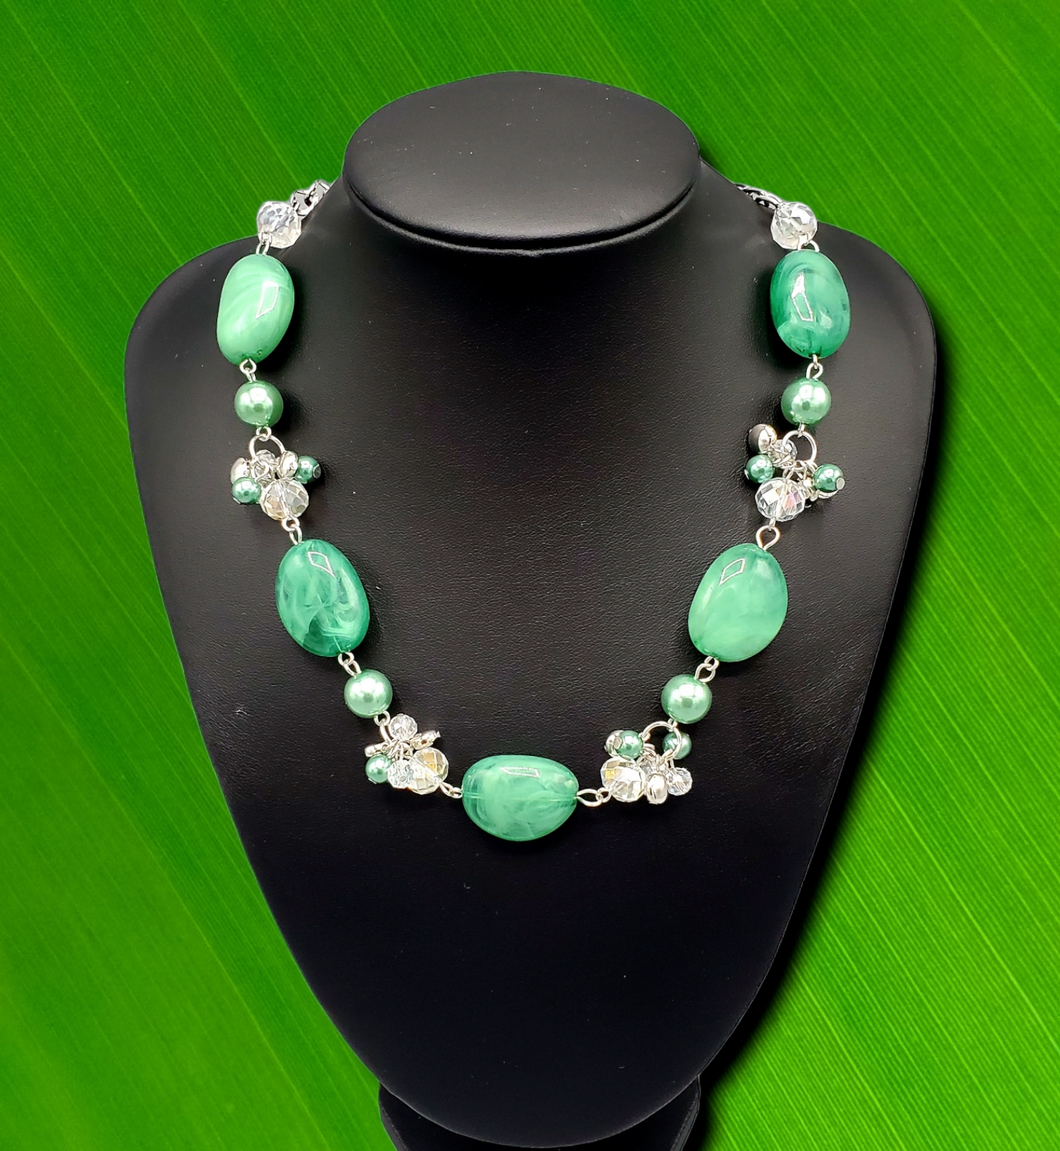 The Top TENACIOUS Green Necklace and Earrings